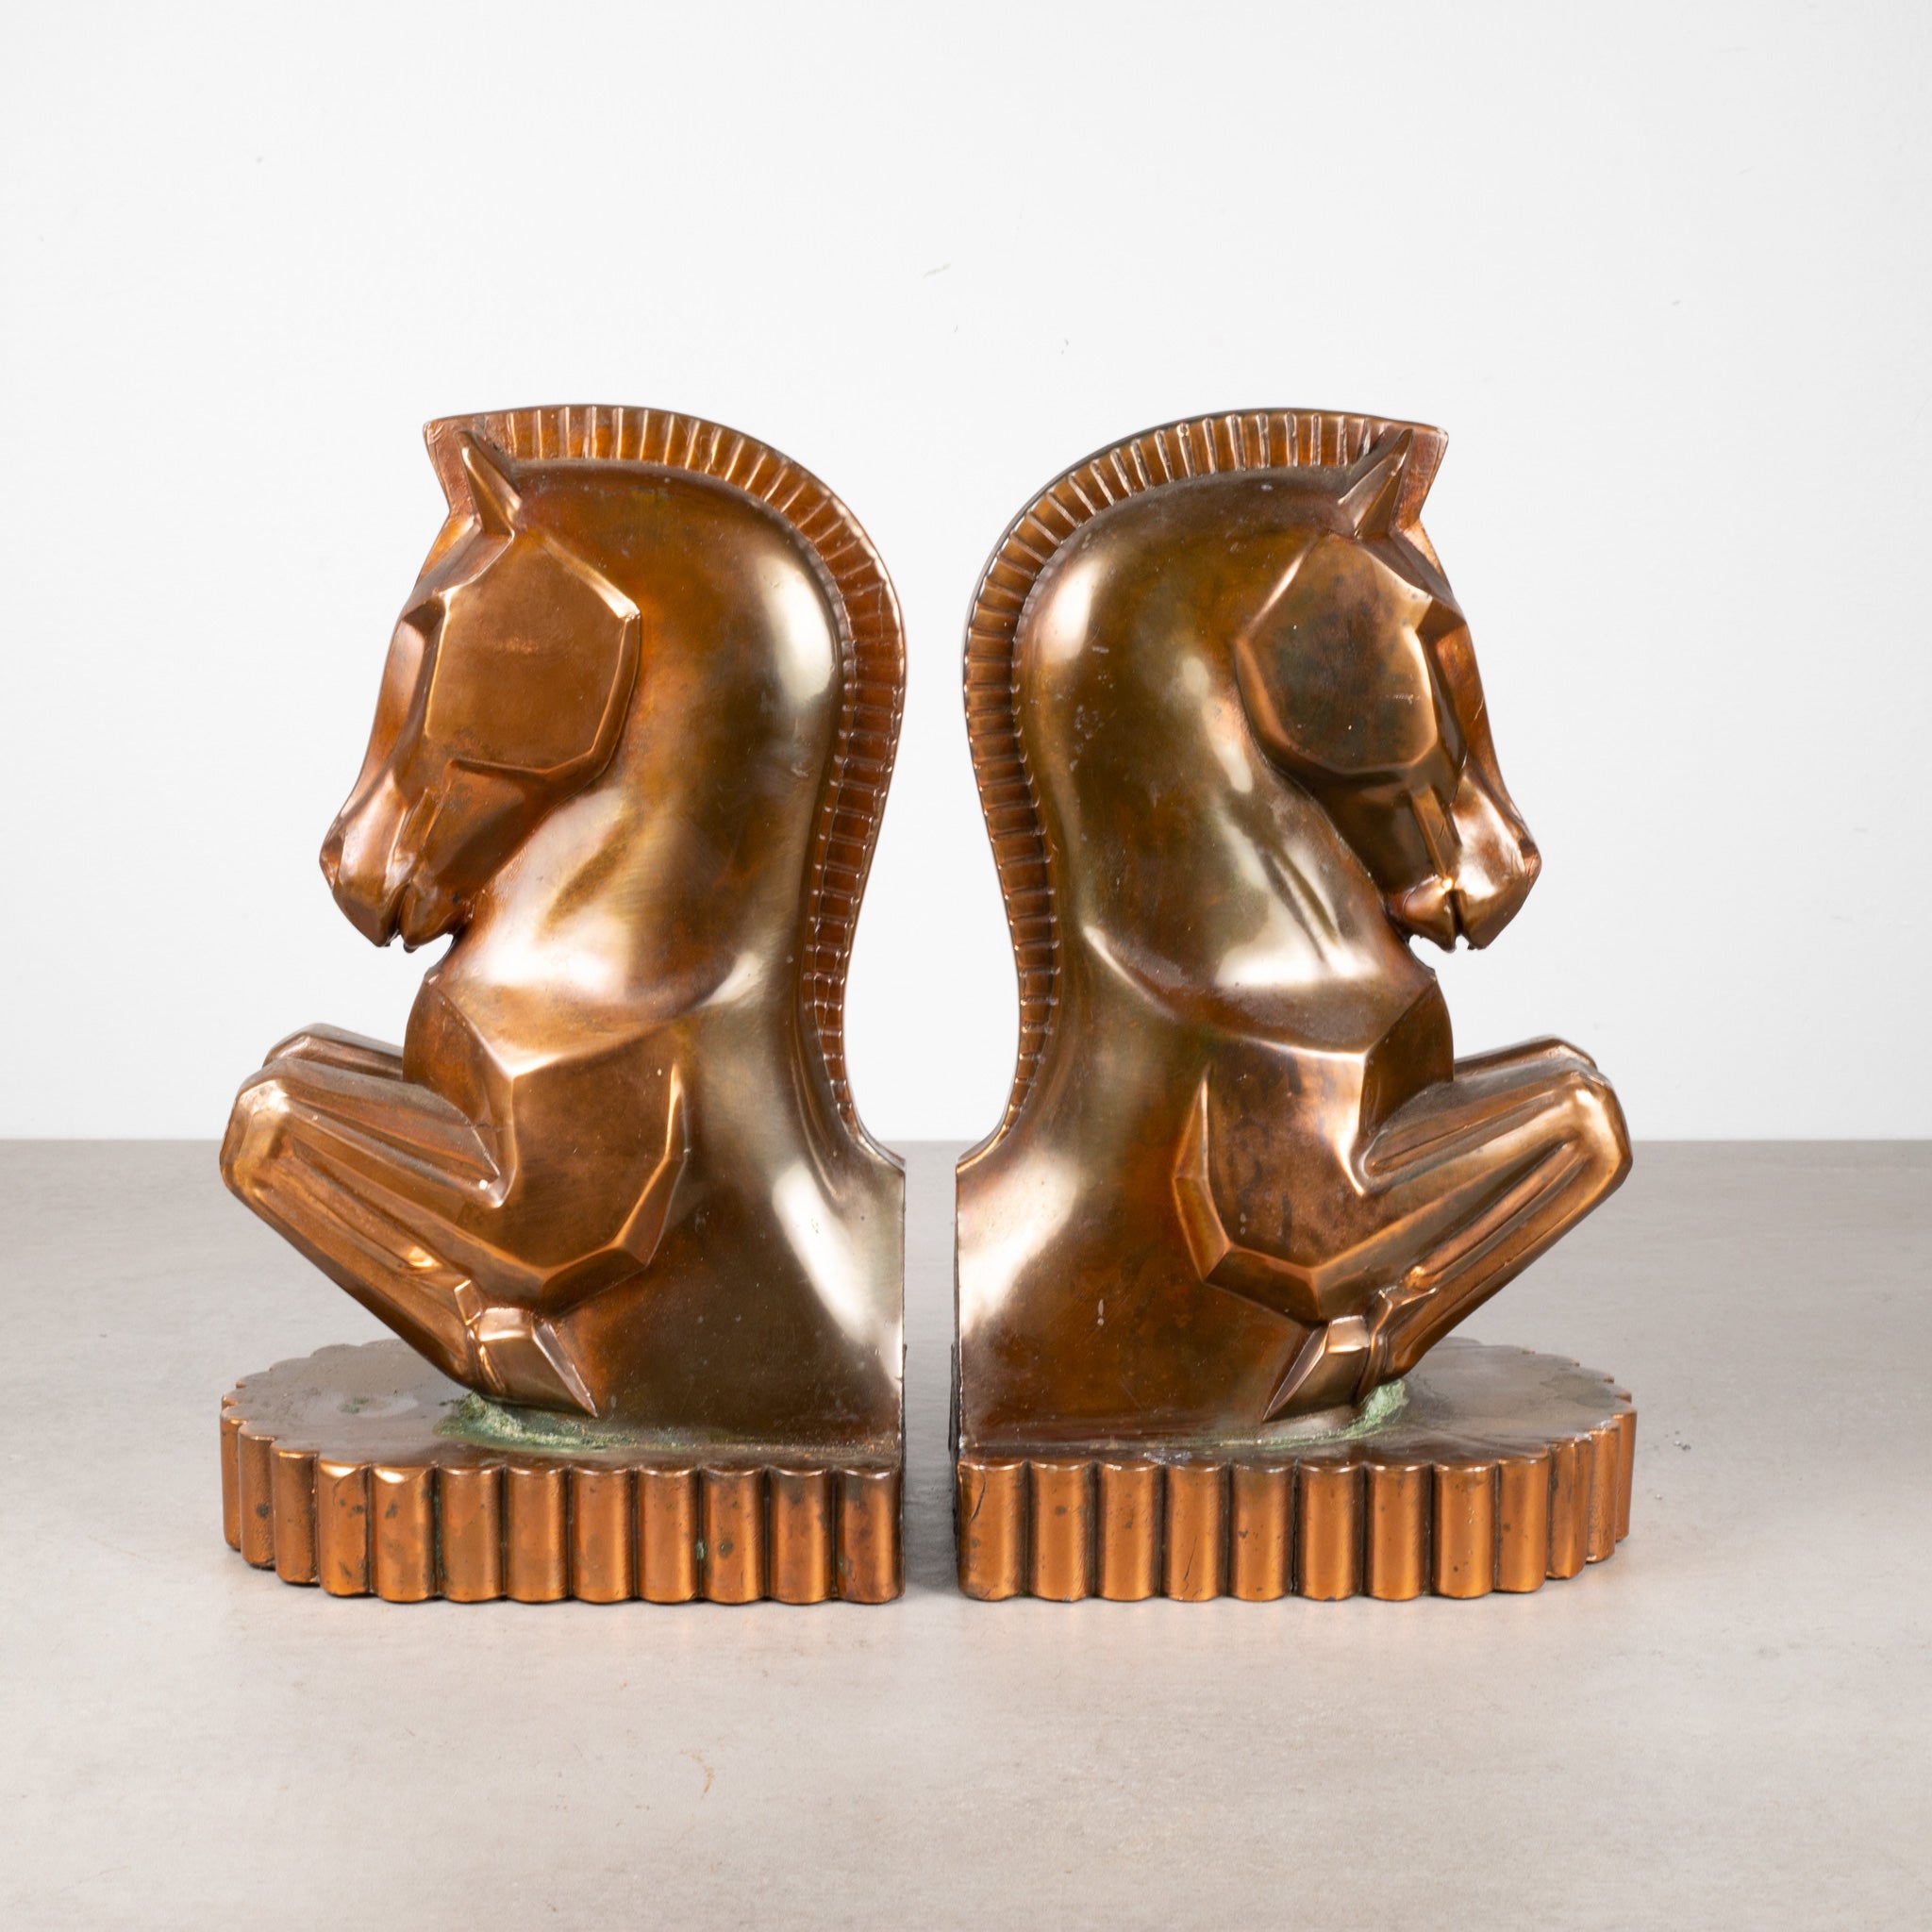 Oversize Art Deco Bronze Plated Trojan Horse Bookends by Champion